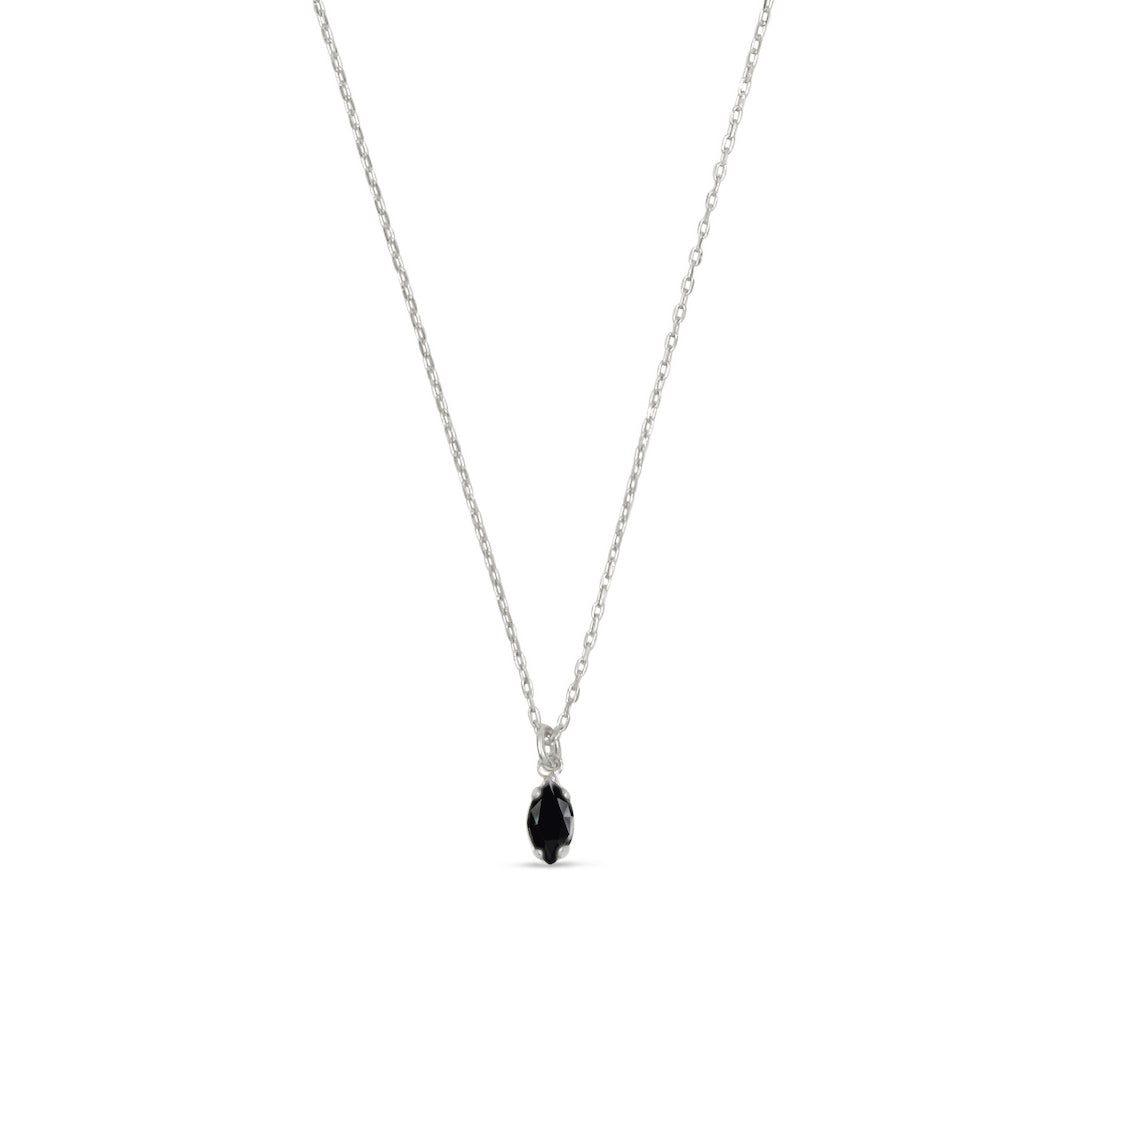 Tiny Marquis Necklace - Bing Bang Jewelry NYC